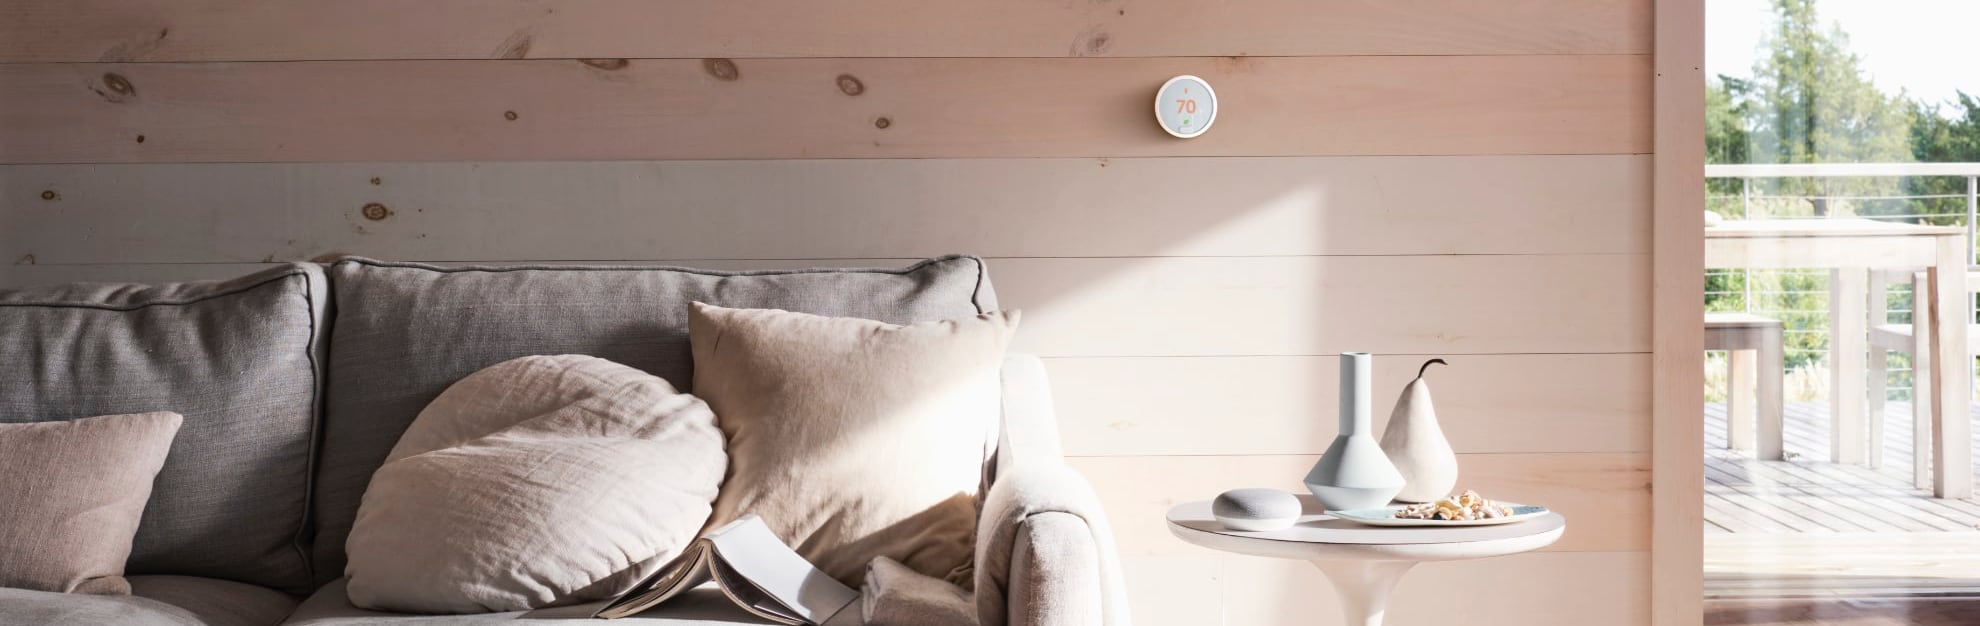 Vivint Home Automation in Helena